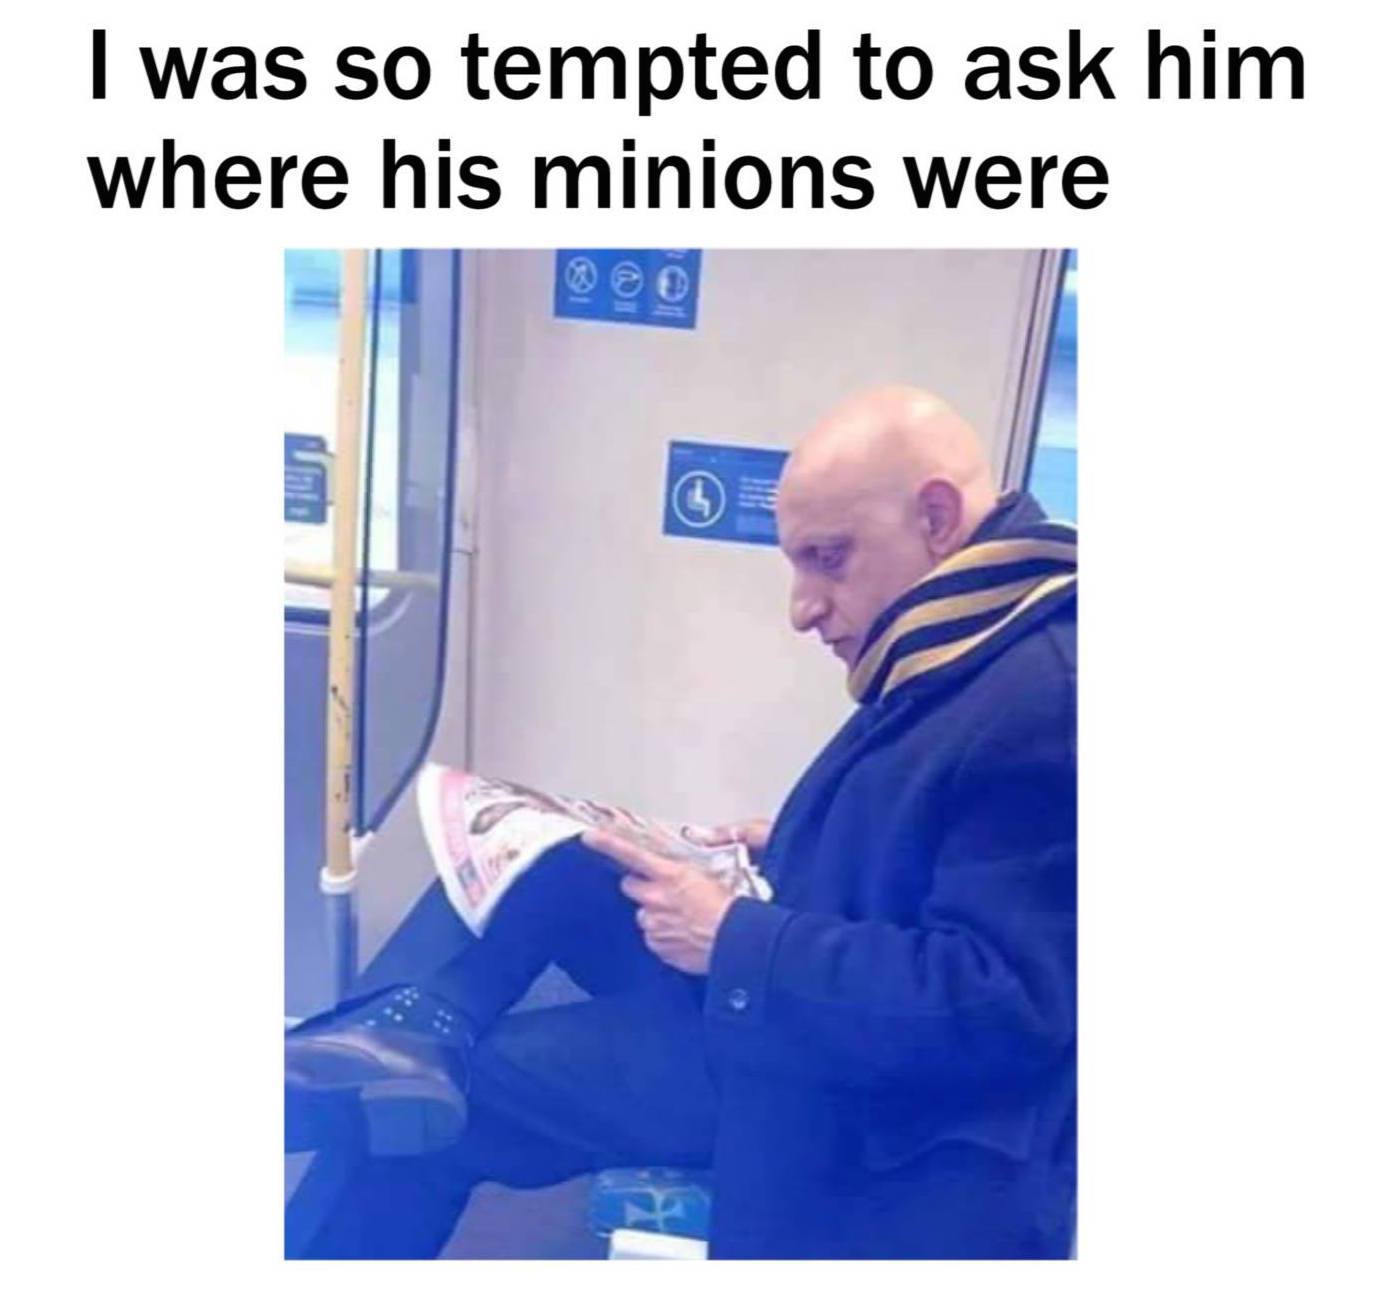 so tempted to ask where his minions were - I was so tempted to ask him where his minions were